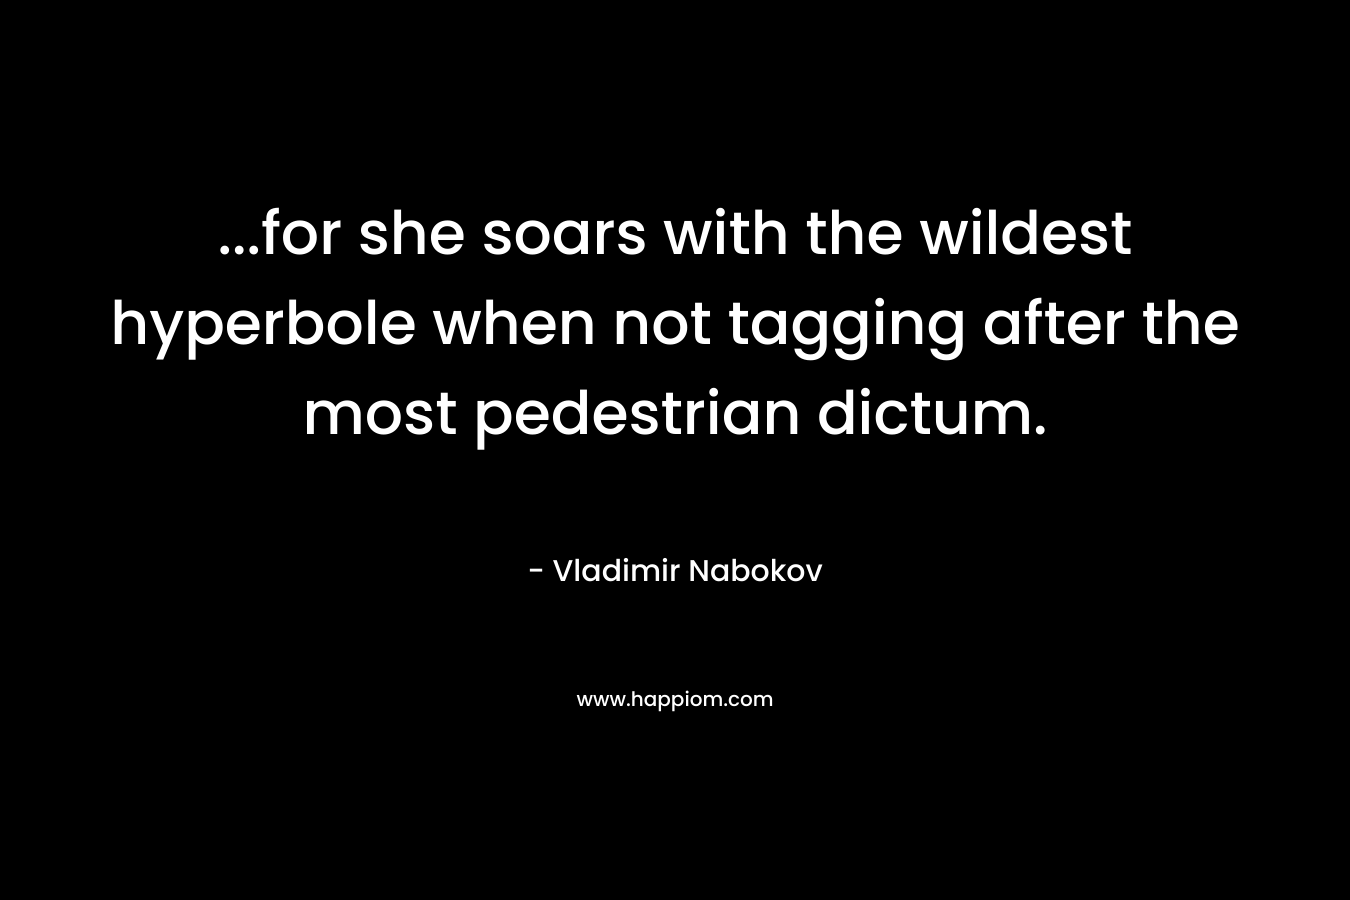 …for she soars with the wildest hyperbole when not tagging after the most pedestrian dictum. – Vladimir Nabokov